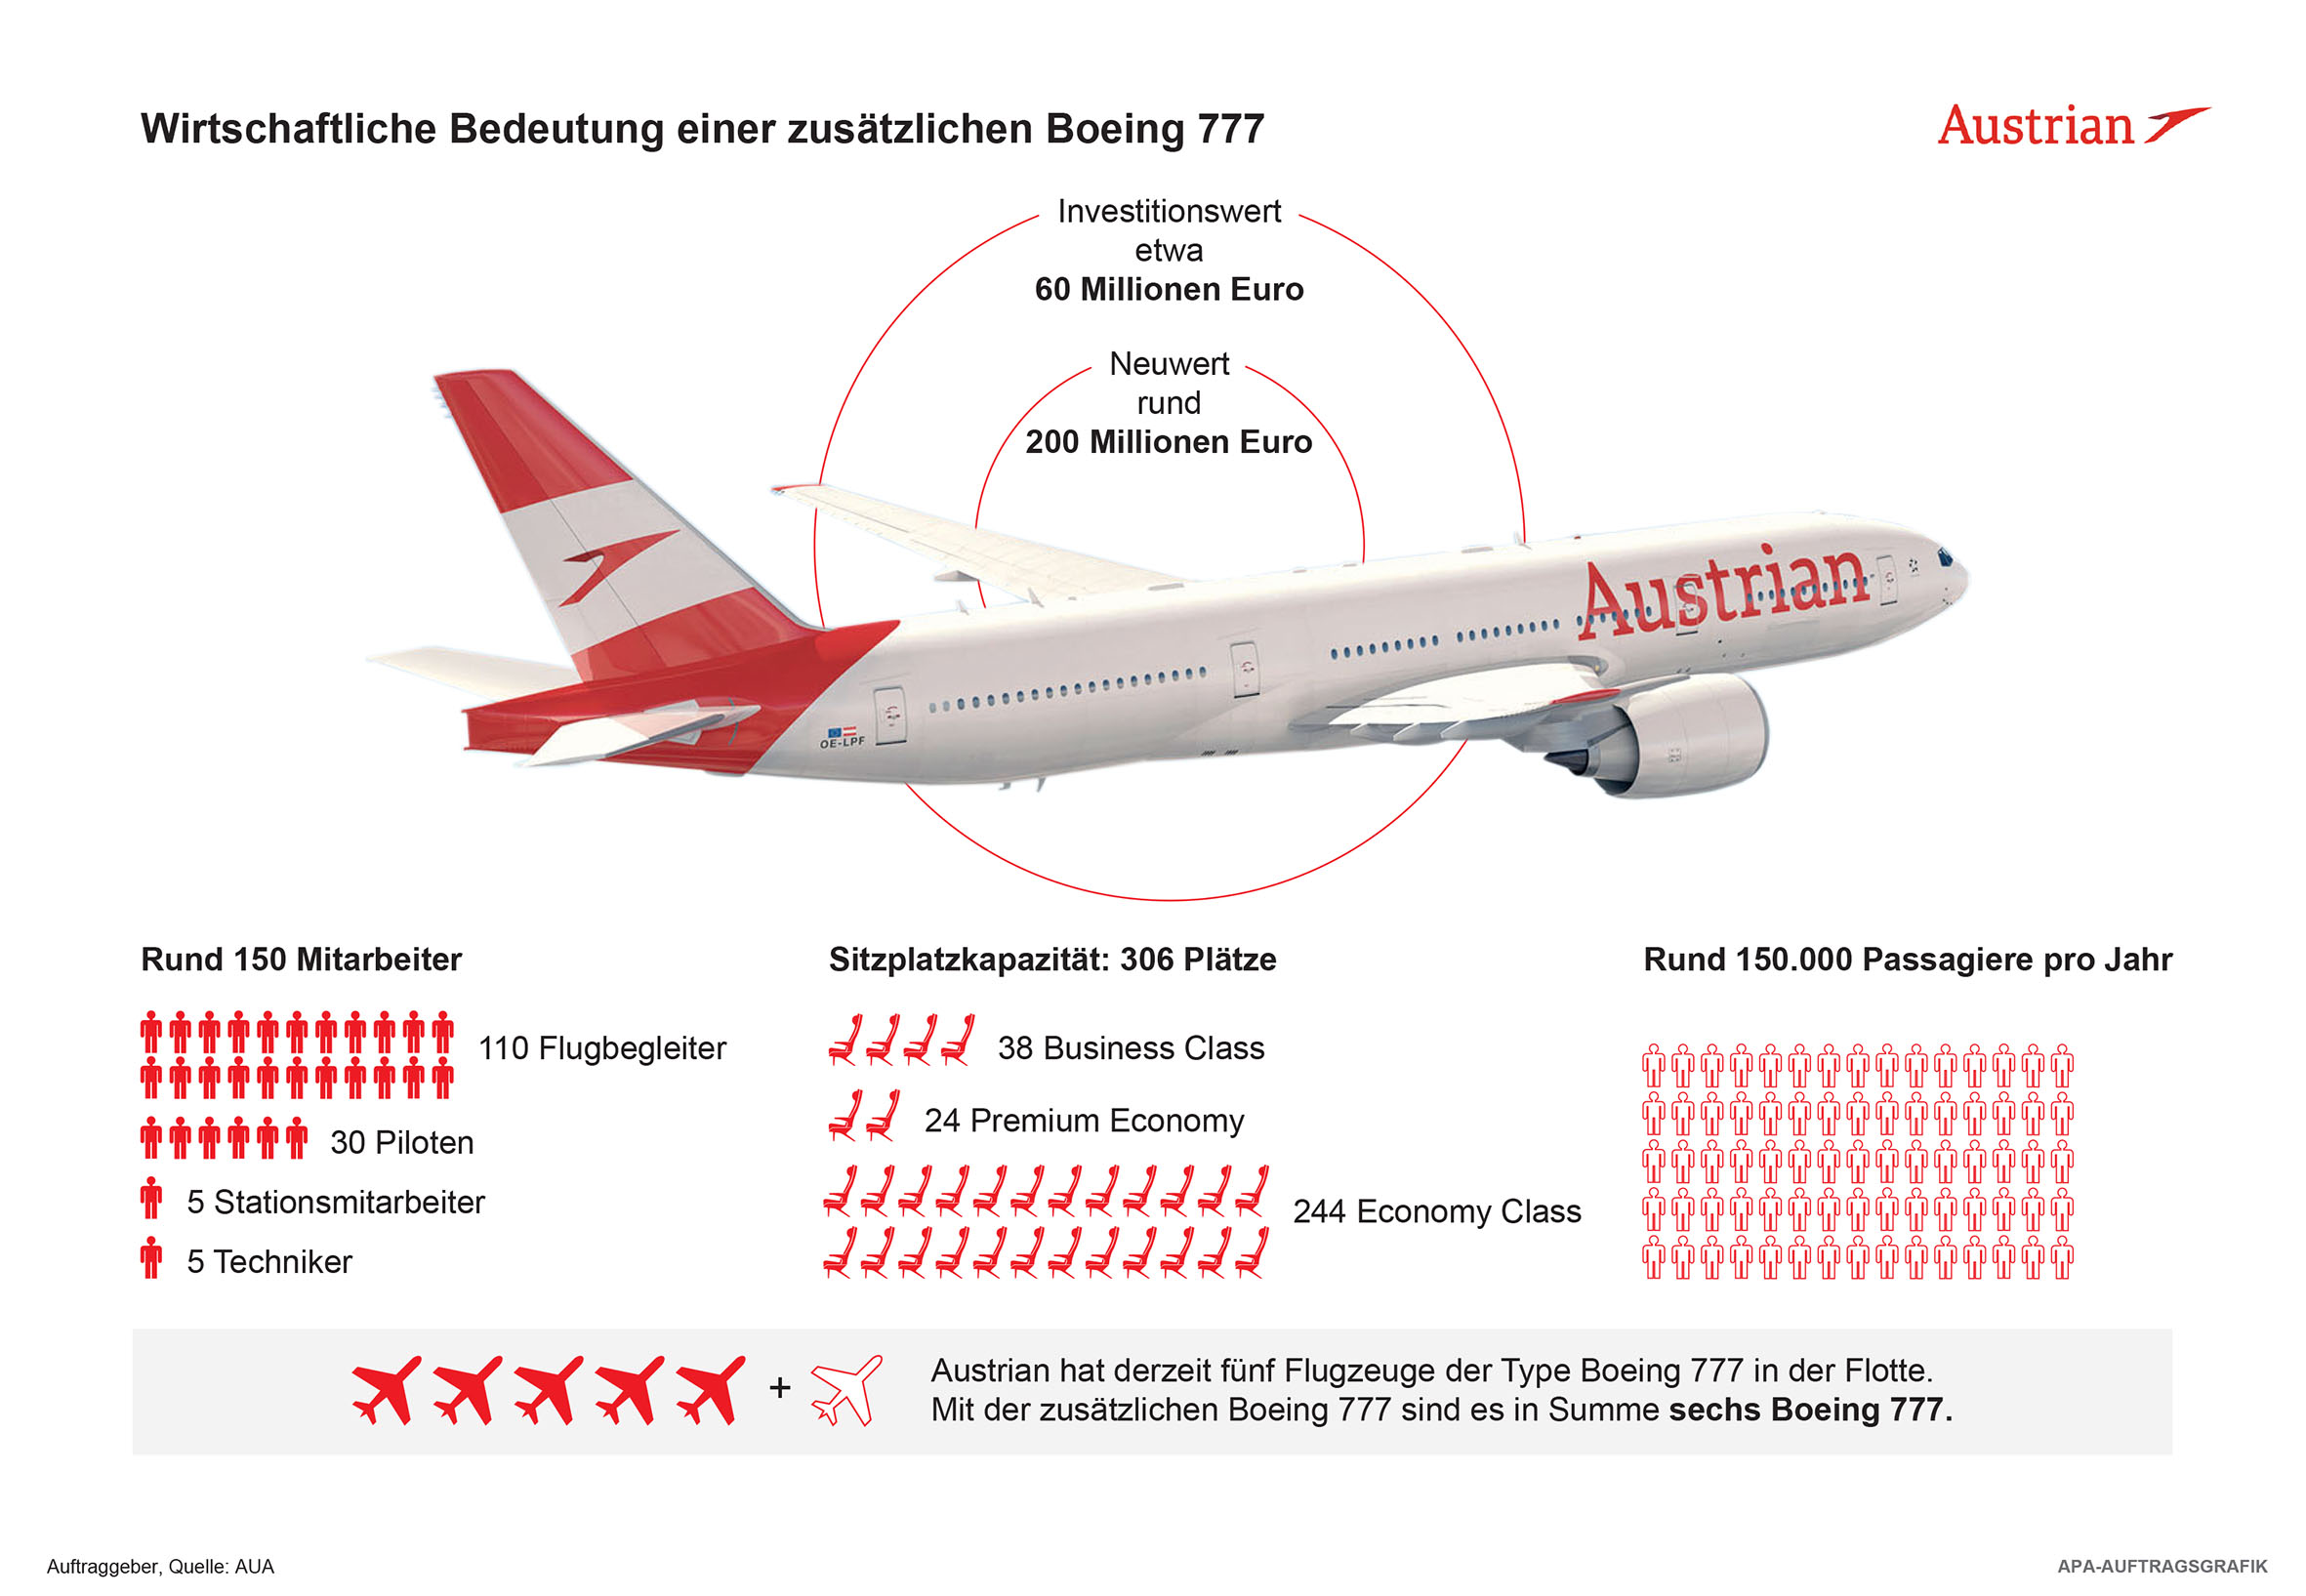 New Boeing 777 of Austrian landing in Vienna for the first time ...